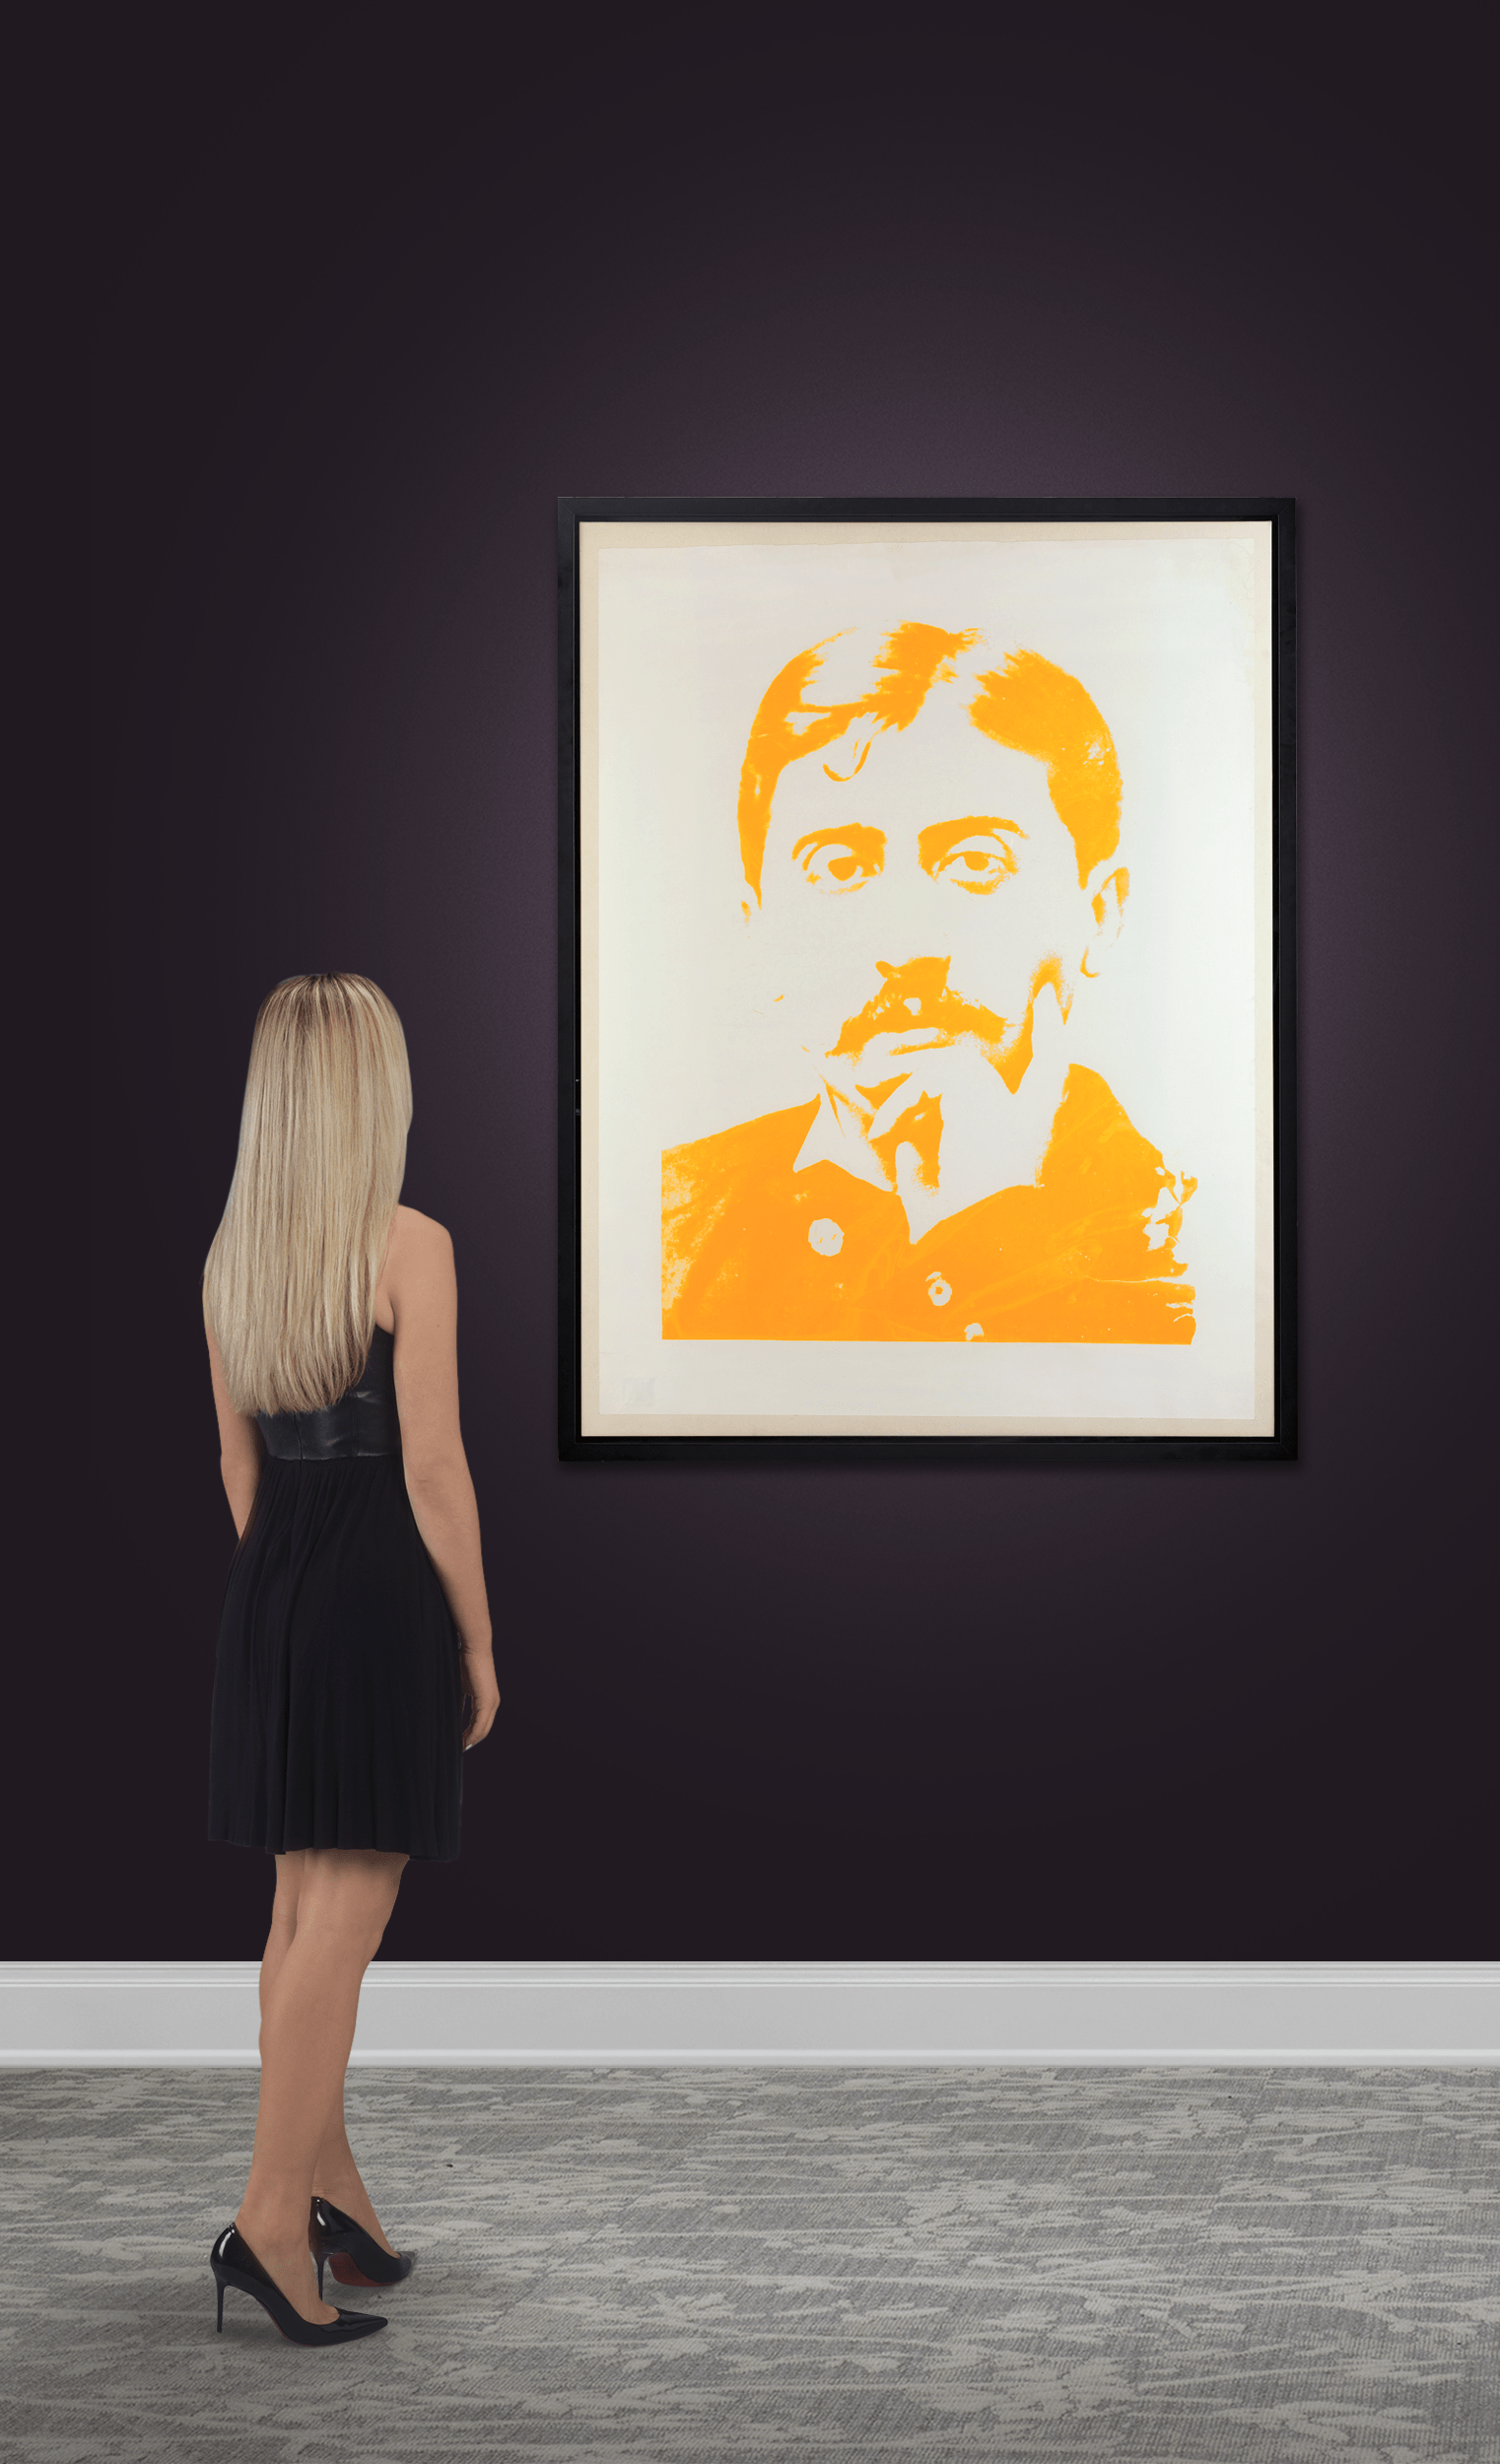 Portrait of Marcel Proust by Andy Warhol